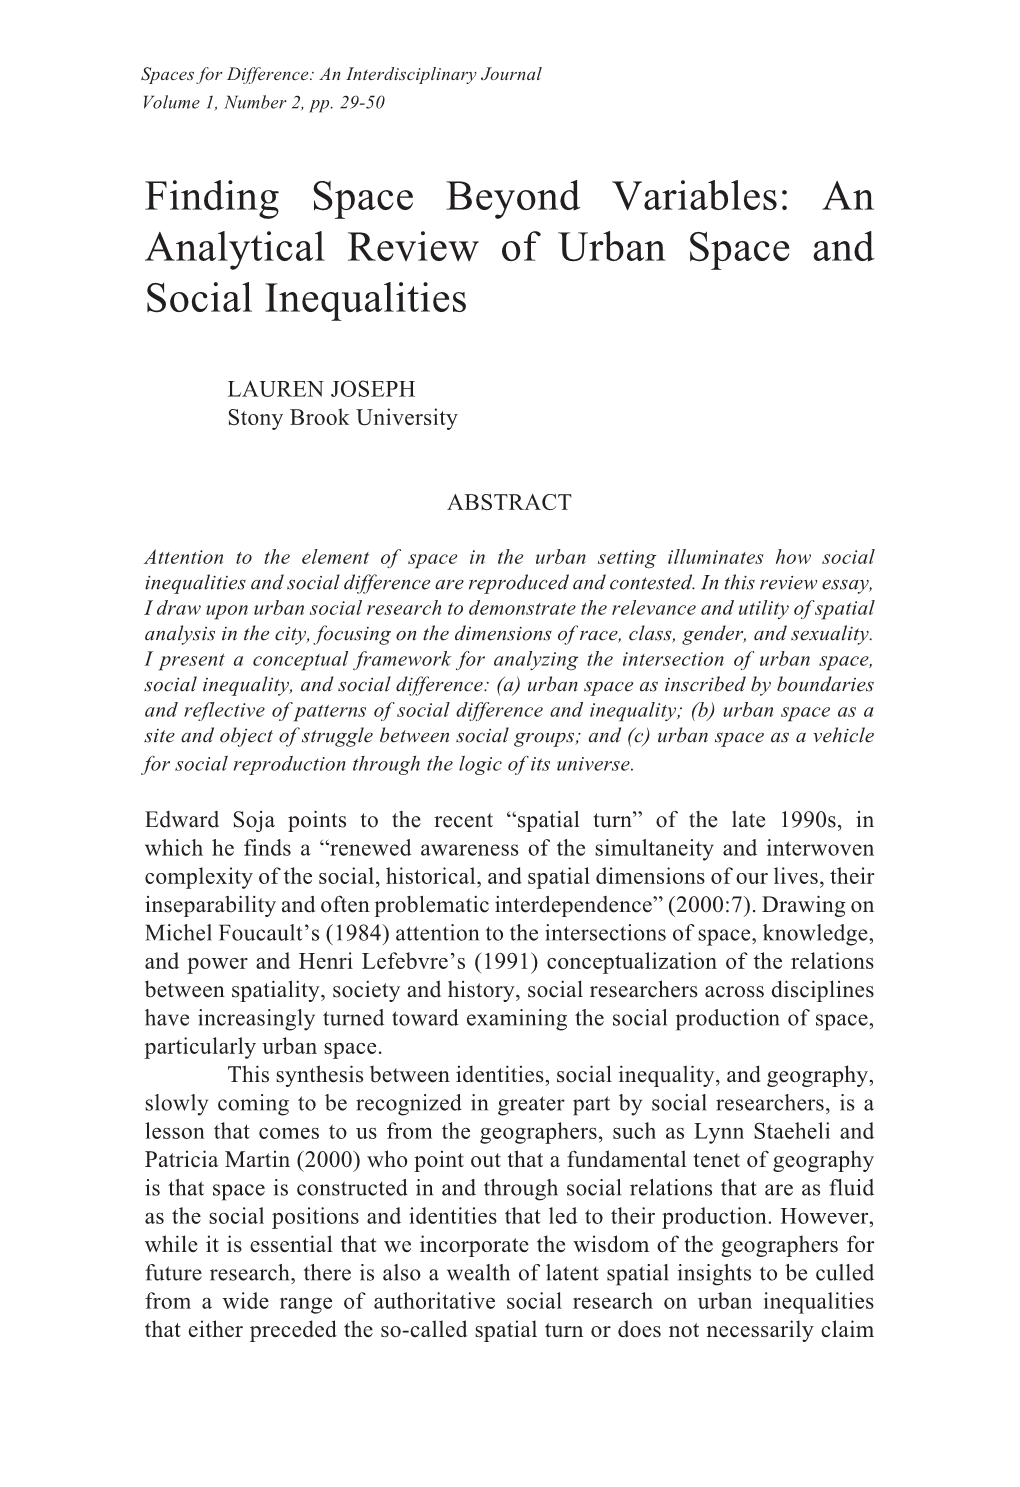 An Analytical Review of Urban Space and Social Inequalities